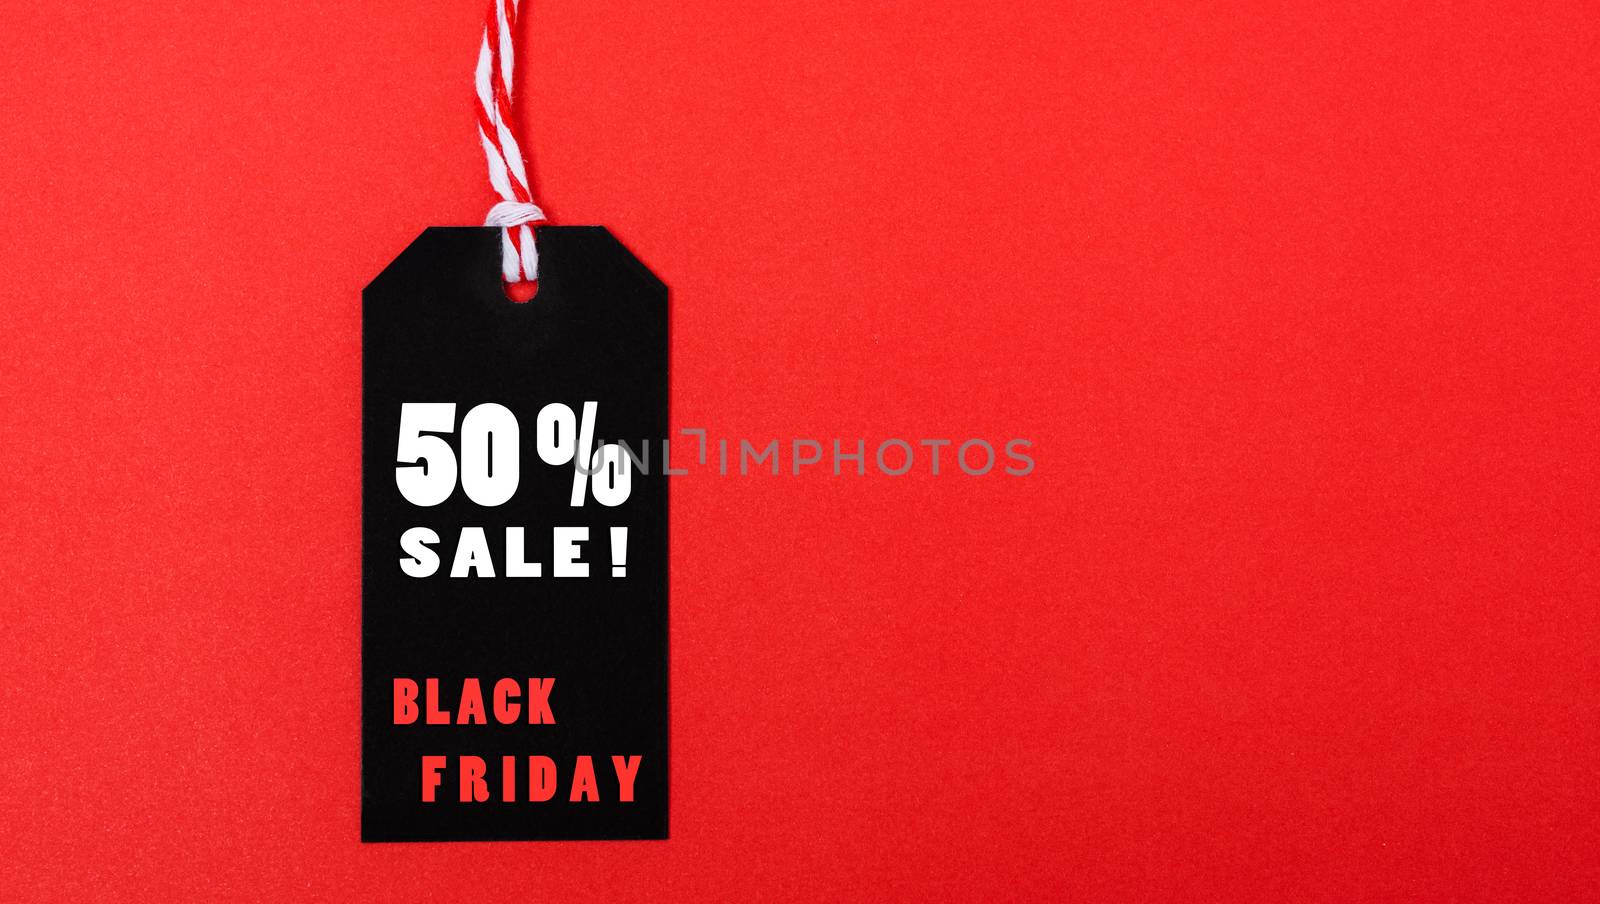 Online shopping, Promotion Black Friday Sale 50% text on black tag on red background.